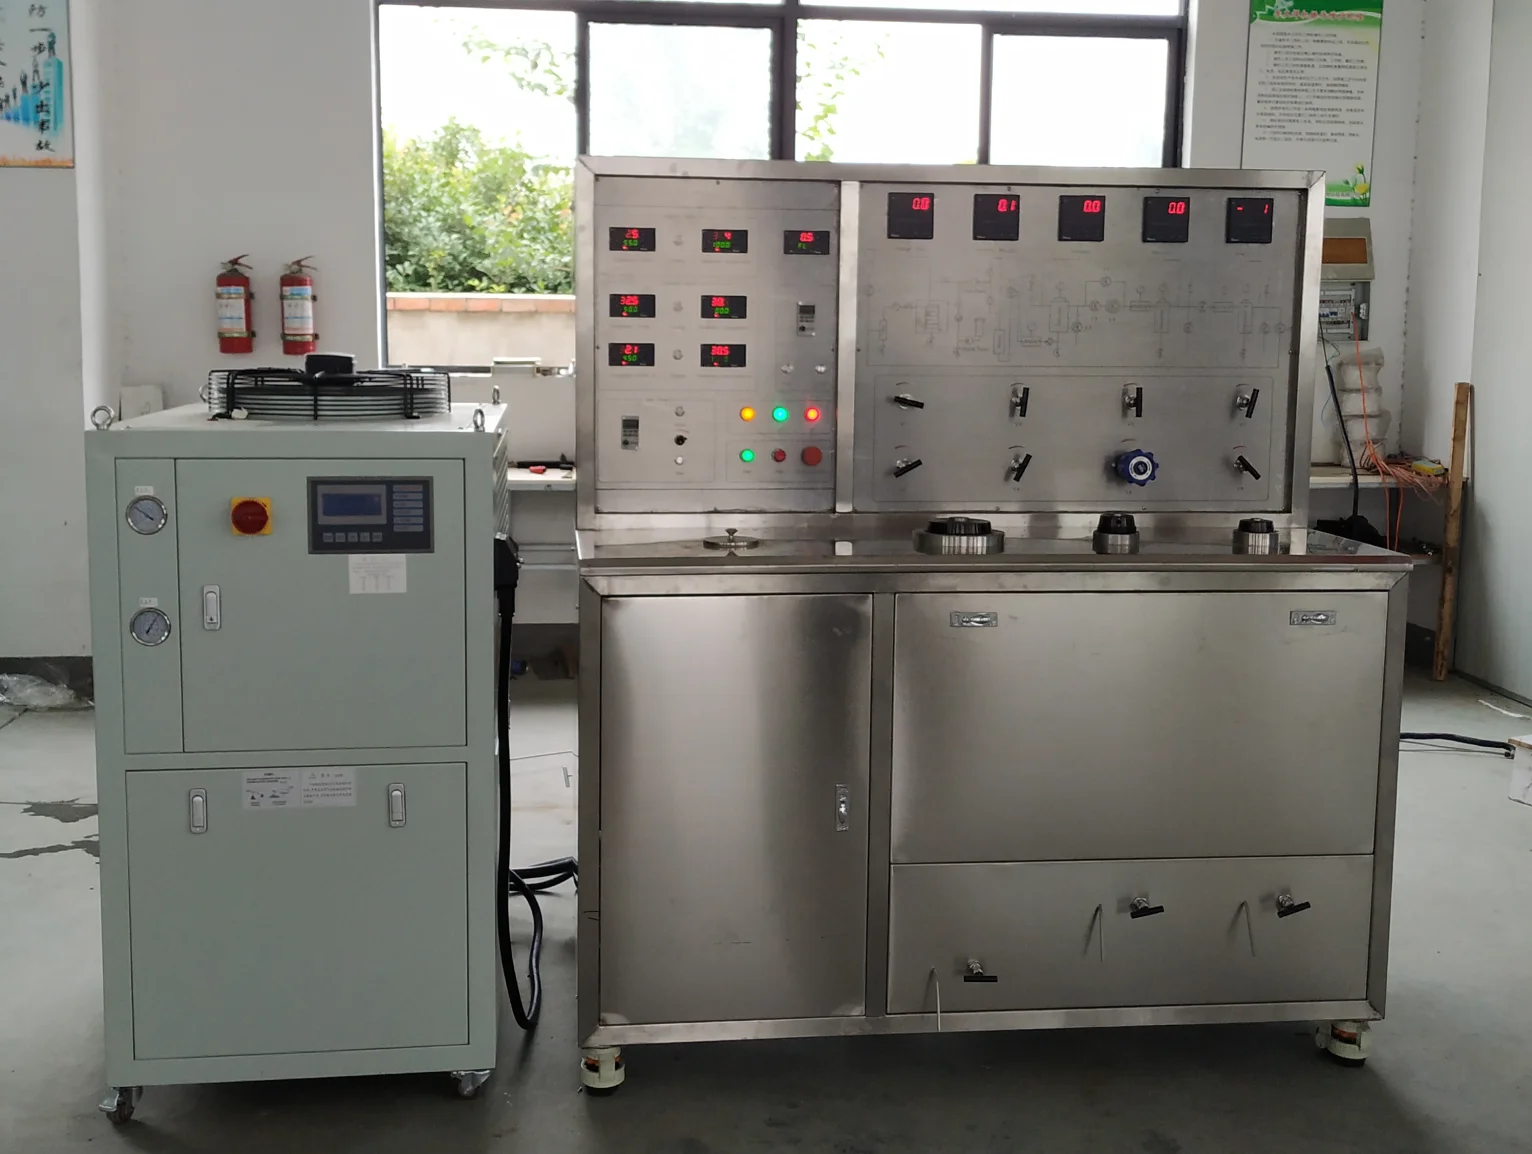 50Mpa 5L Labrotary use co2 supercritical extraction machine